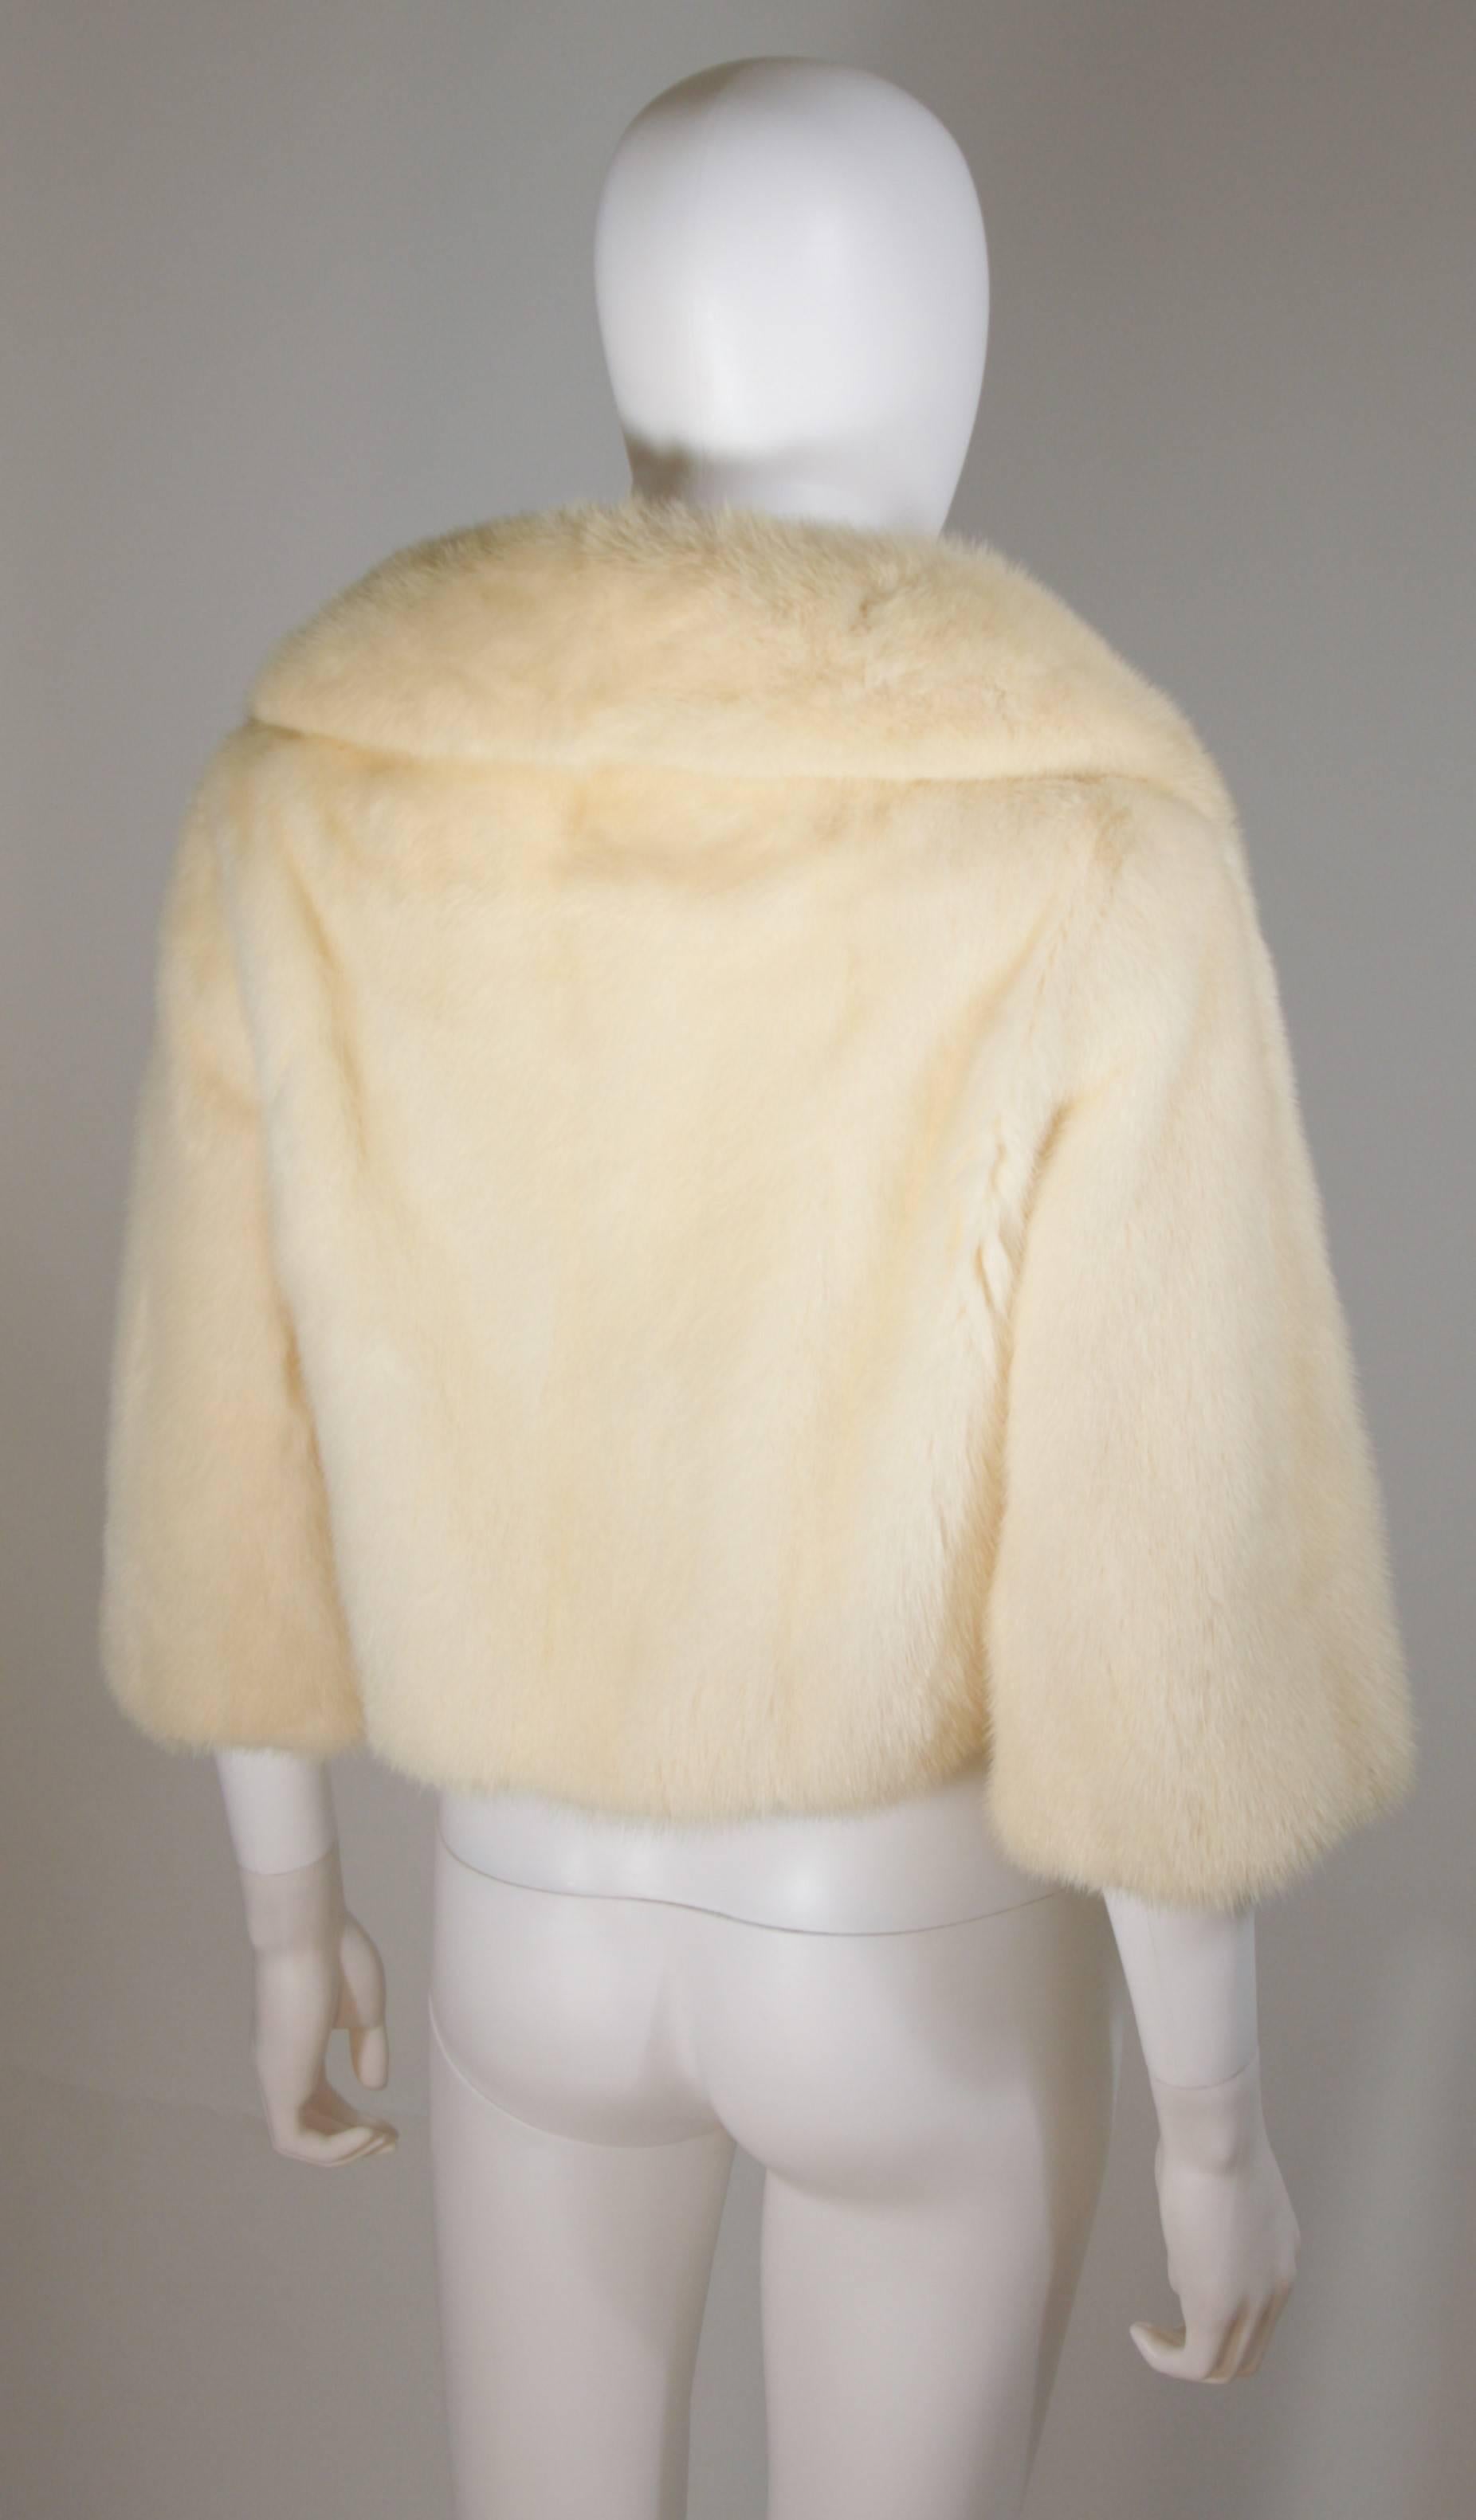 OLEG CASSINI Cream Mink Jacket with Rhinestone & Faux Pearl Buttons Size 6-8 For Sale 2